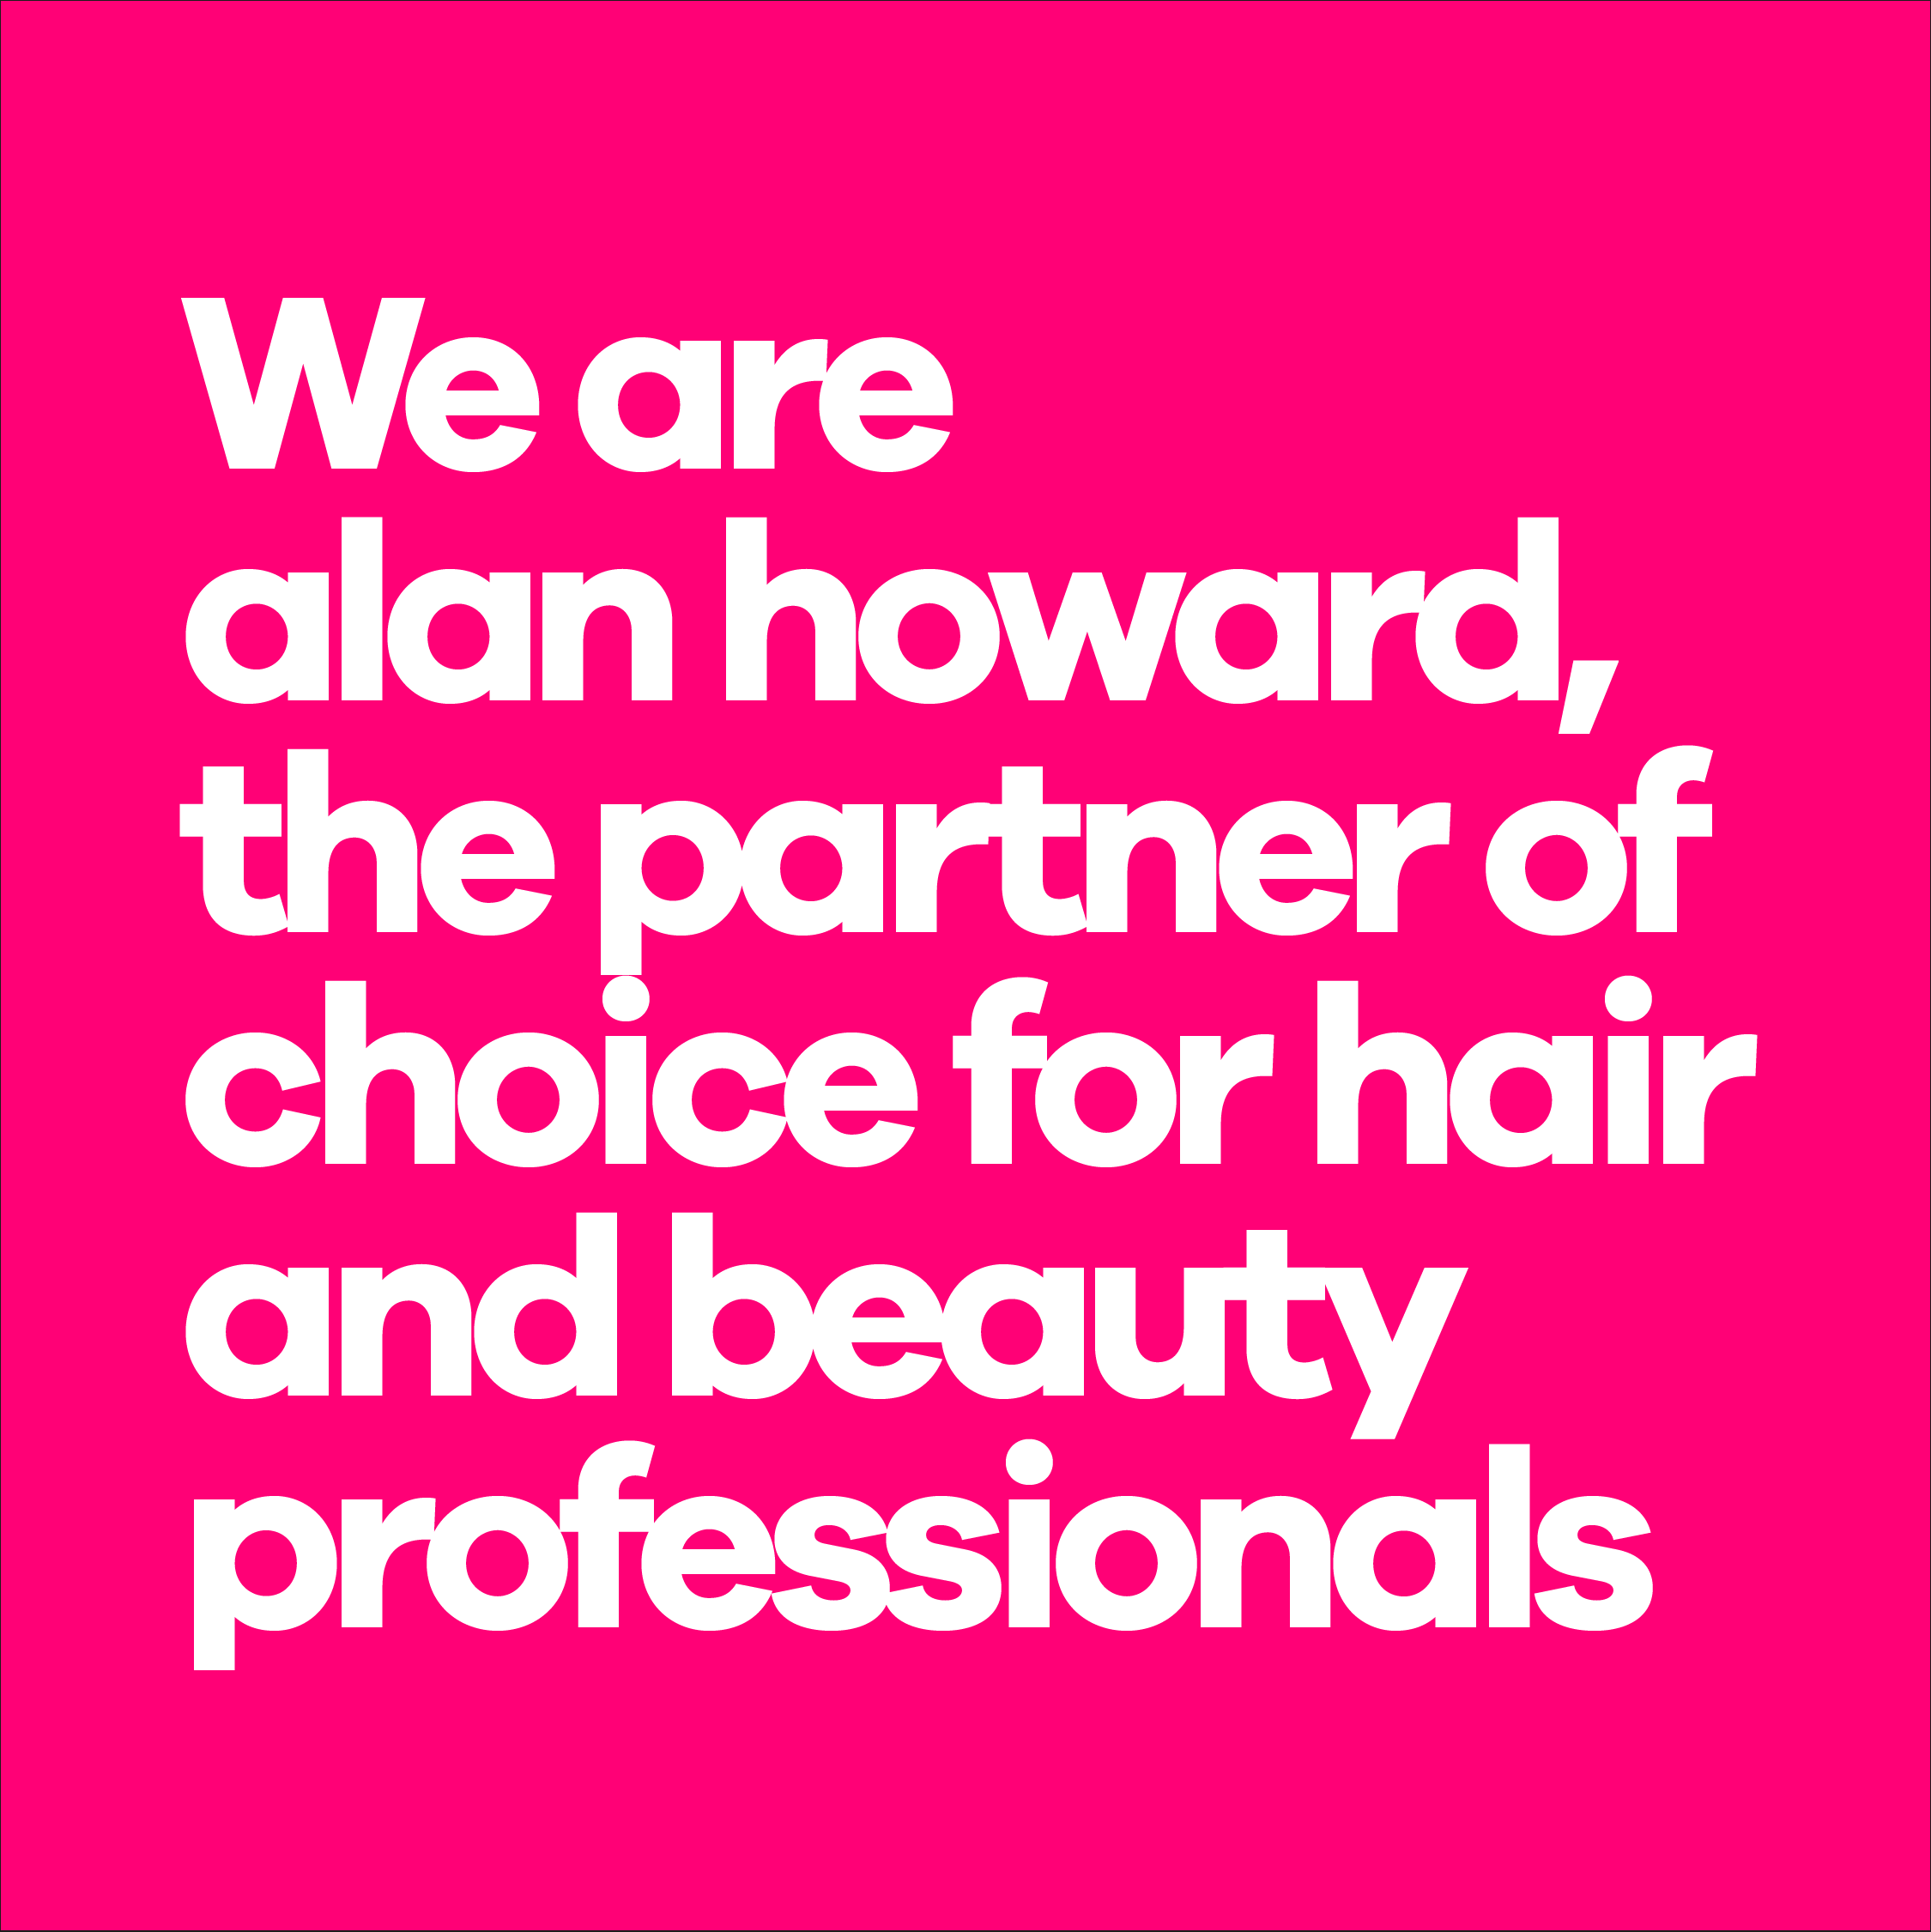 Alan Howard comany tagline - We are Alan Howard, the partner of choice for hair and beauty professionals